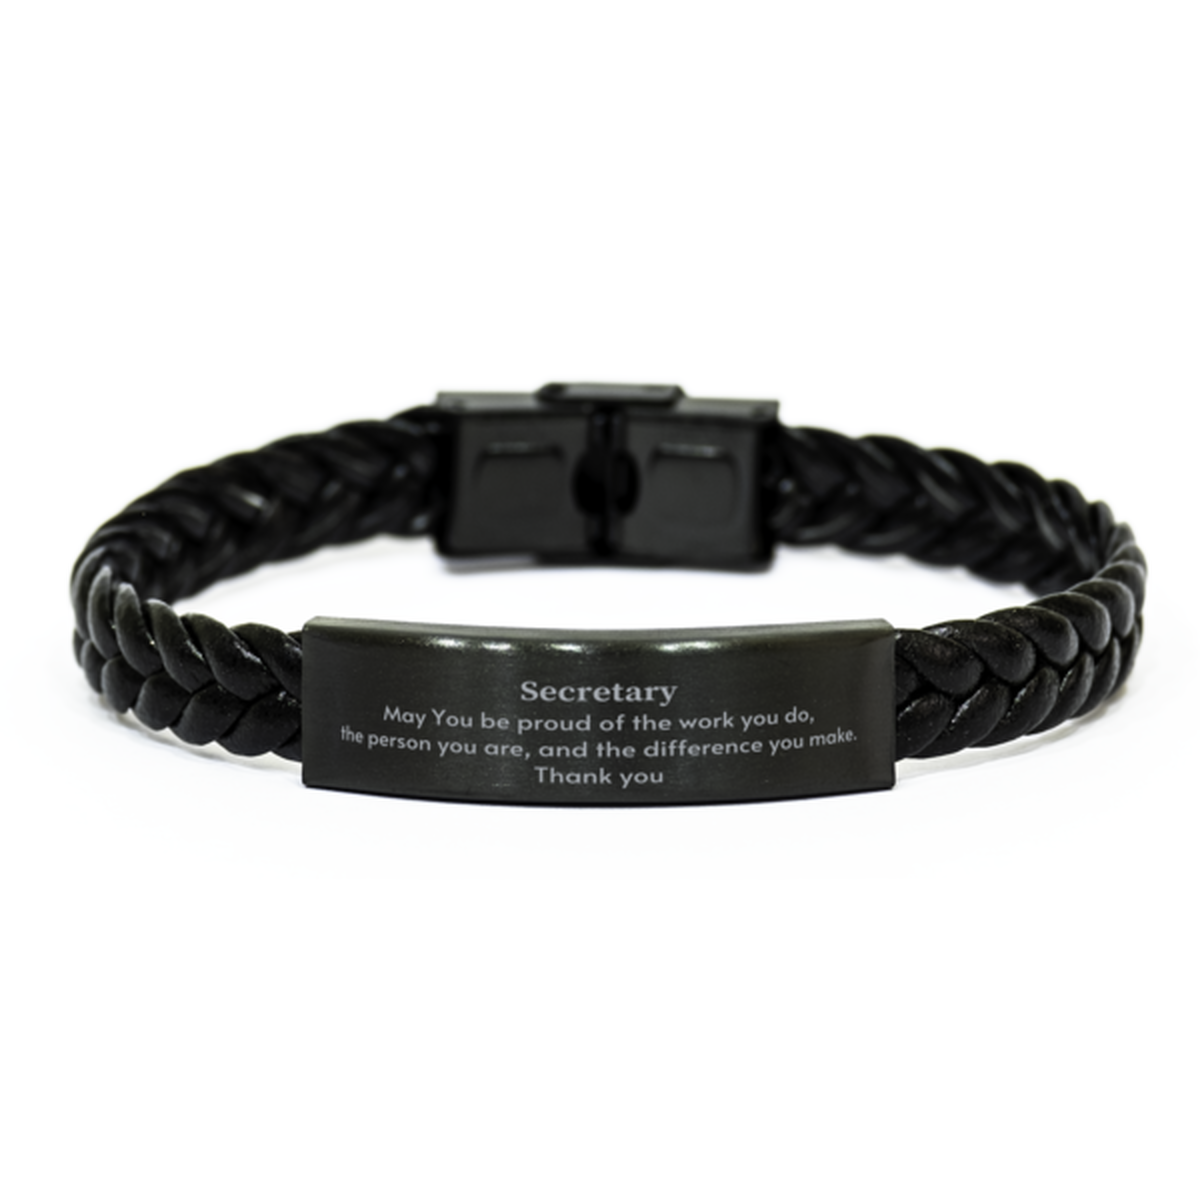 Heartwarming Braided Leather Bracelet Retirement Coworkers Gifts for Secretary, Secretary May You be proud of the work you do, the person you are Gifts for Boss Men Women Friends